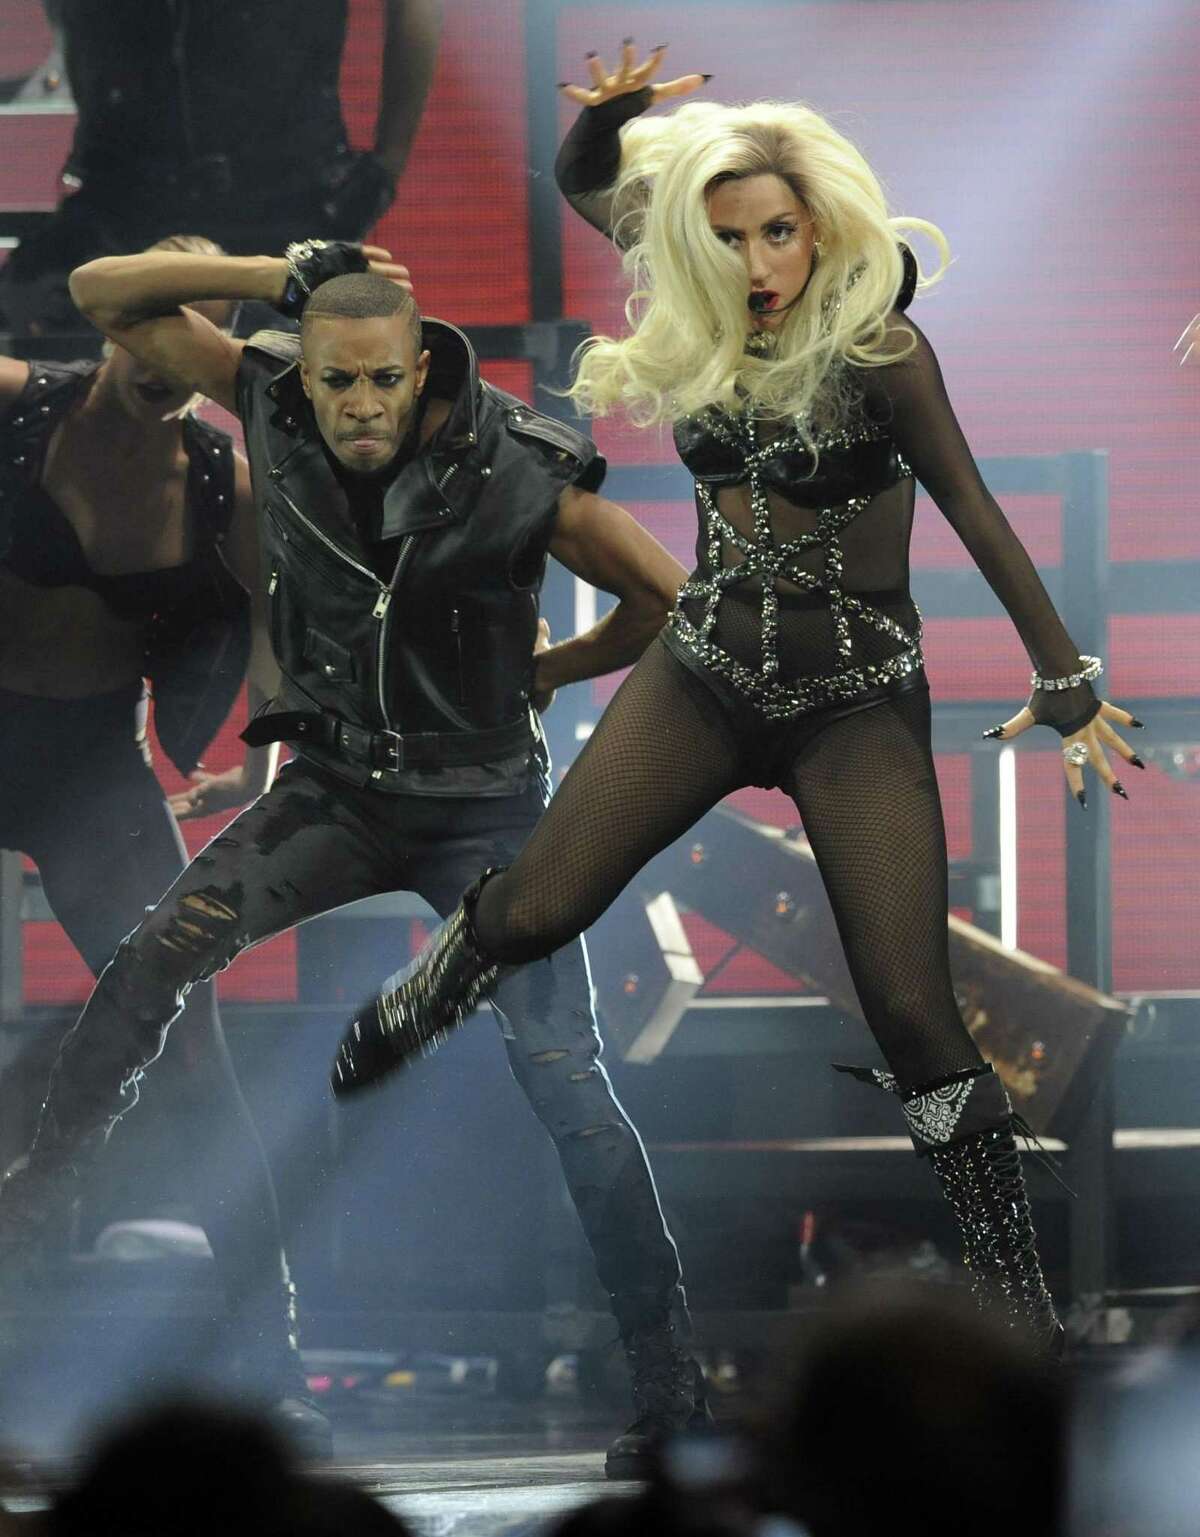 In this Sept. 24 file photo, Lady Gaga performs during the iHeartRadio music festival in Las Vegas. Lady Gaga has been voted the Associated Press Entertainer of the Year. (AP Photo/Chris Pizzello, file)